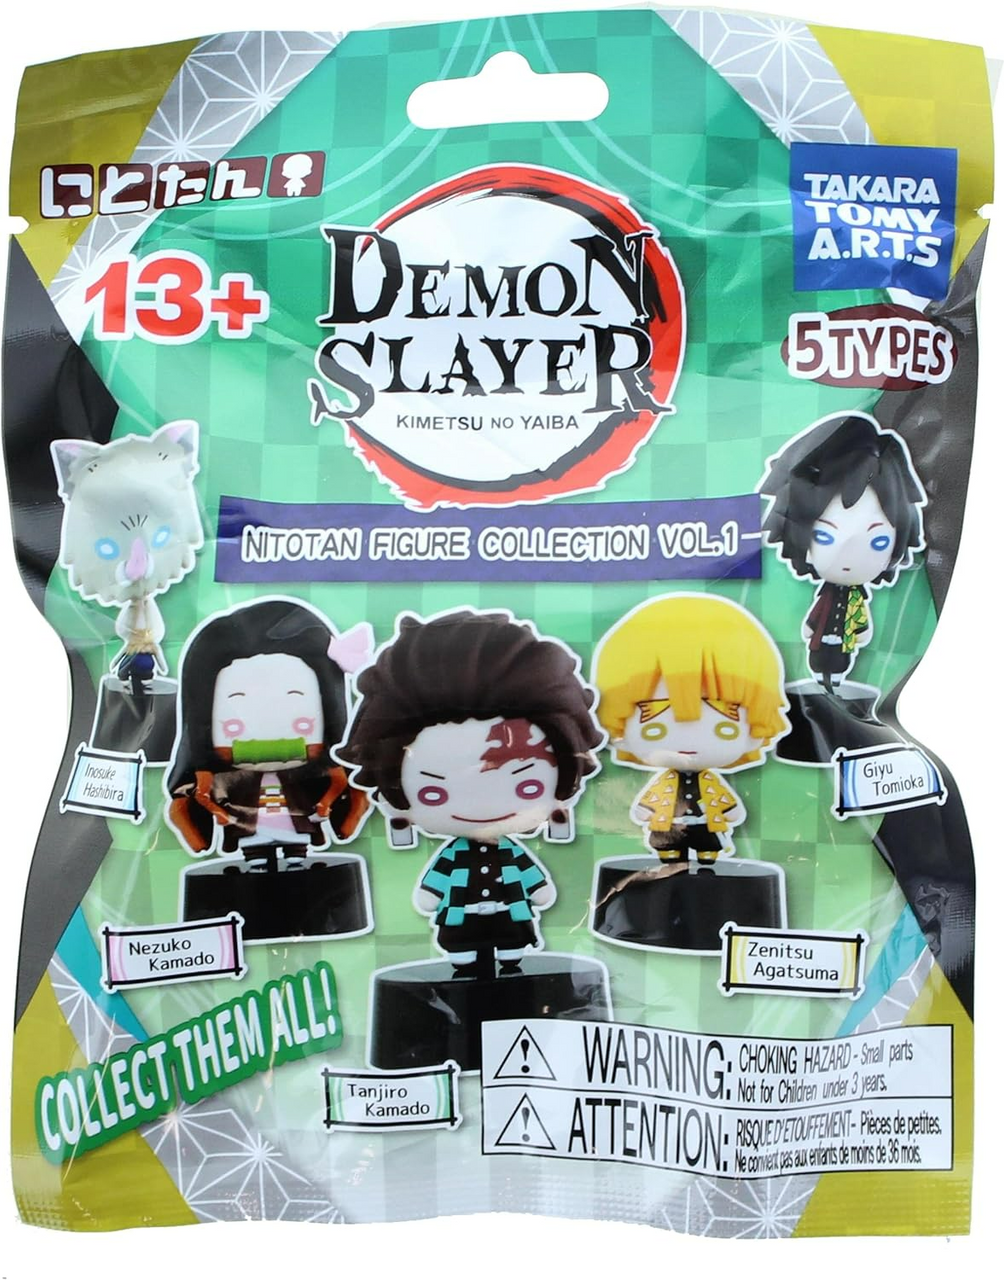  Haikyu!! Mystery Blind Bag Figures, 2-Pack - Receive 2 of 6  Assorted Character Minifigures - 2 Surprise Mini Haikyu Manga Voleyball  Toys to Collect - Officially Licensed - Gift for Kids